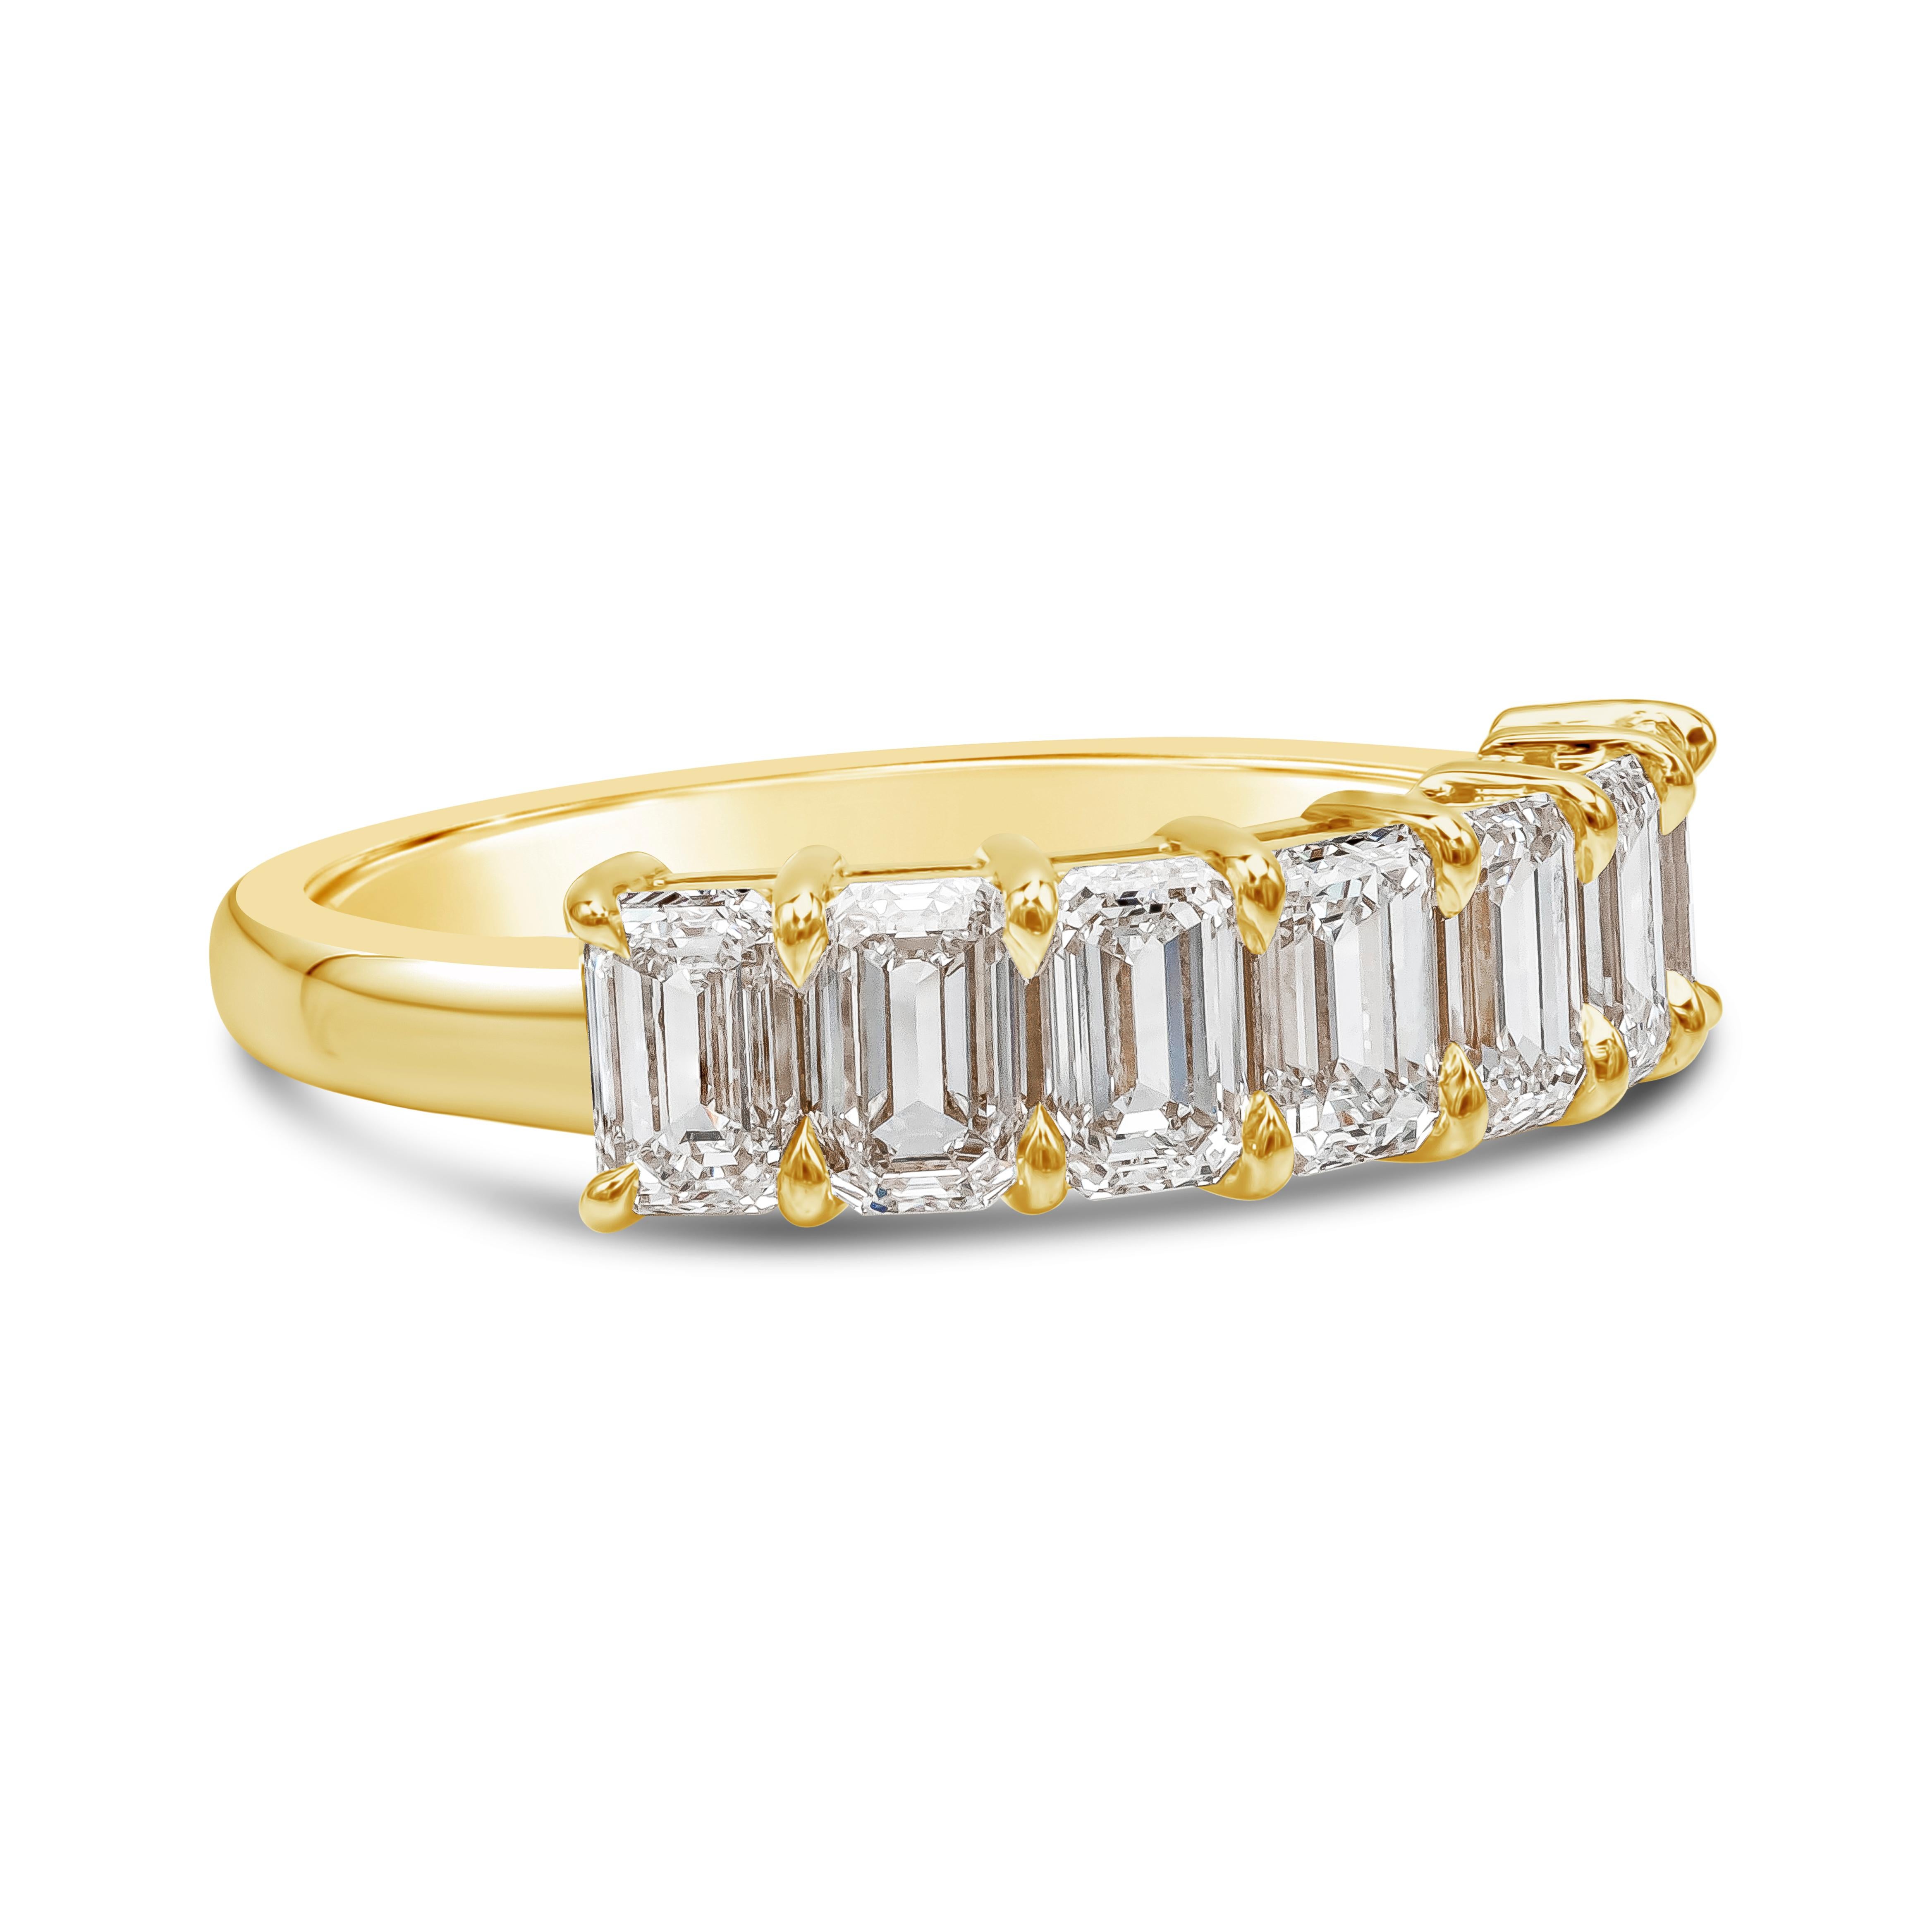 A classic wedding band ring style showcasing seven emerald cut diamonds weighing 2.25 carats total, F color and VS in clarity, set in a timeless shared-prong basket setting. Made in 18K Yellow Gold, Size 6.5 US resizable upon request.

Style